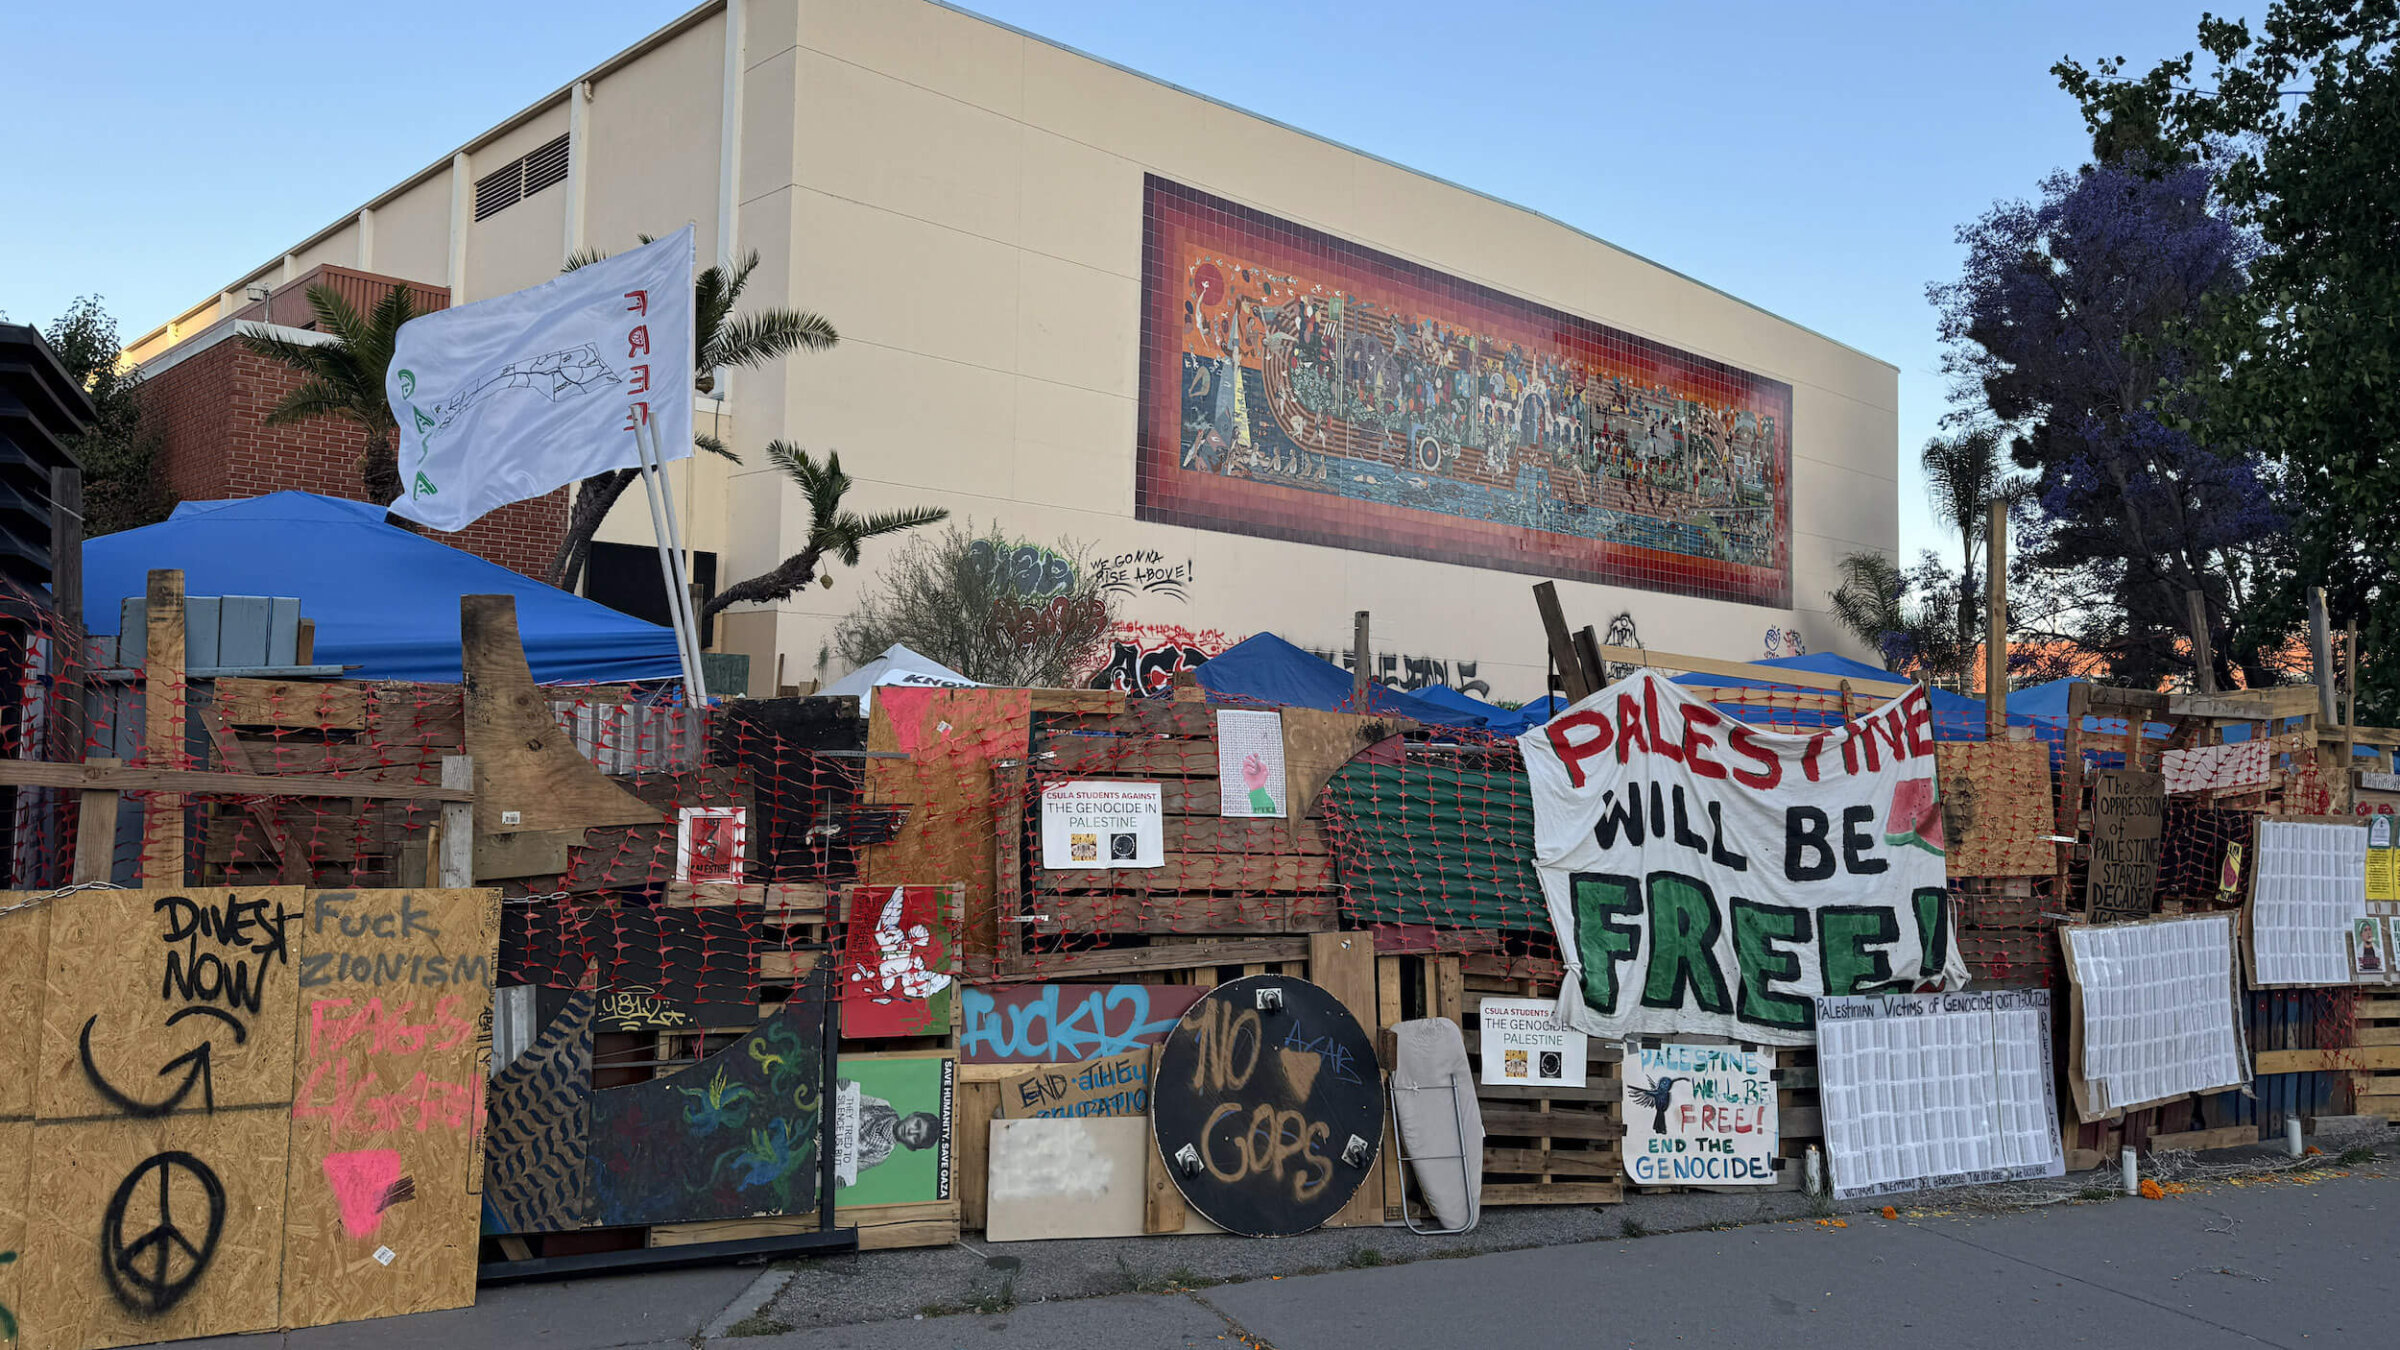 A pro-Palestinian protest encampment at California State University, Los Angeles, pictured in June.